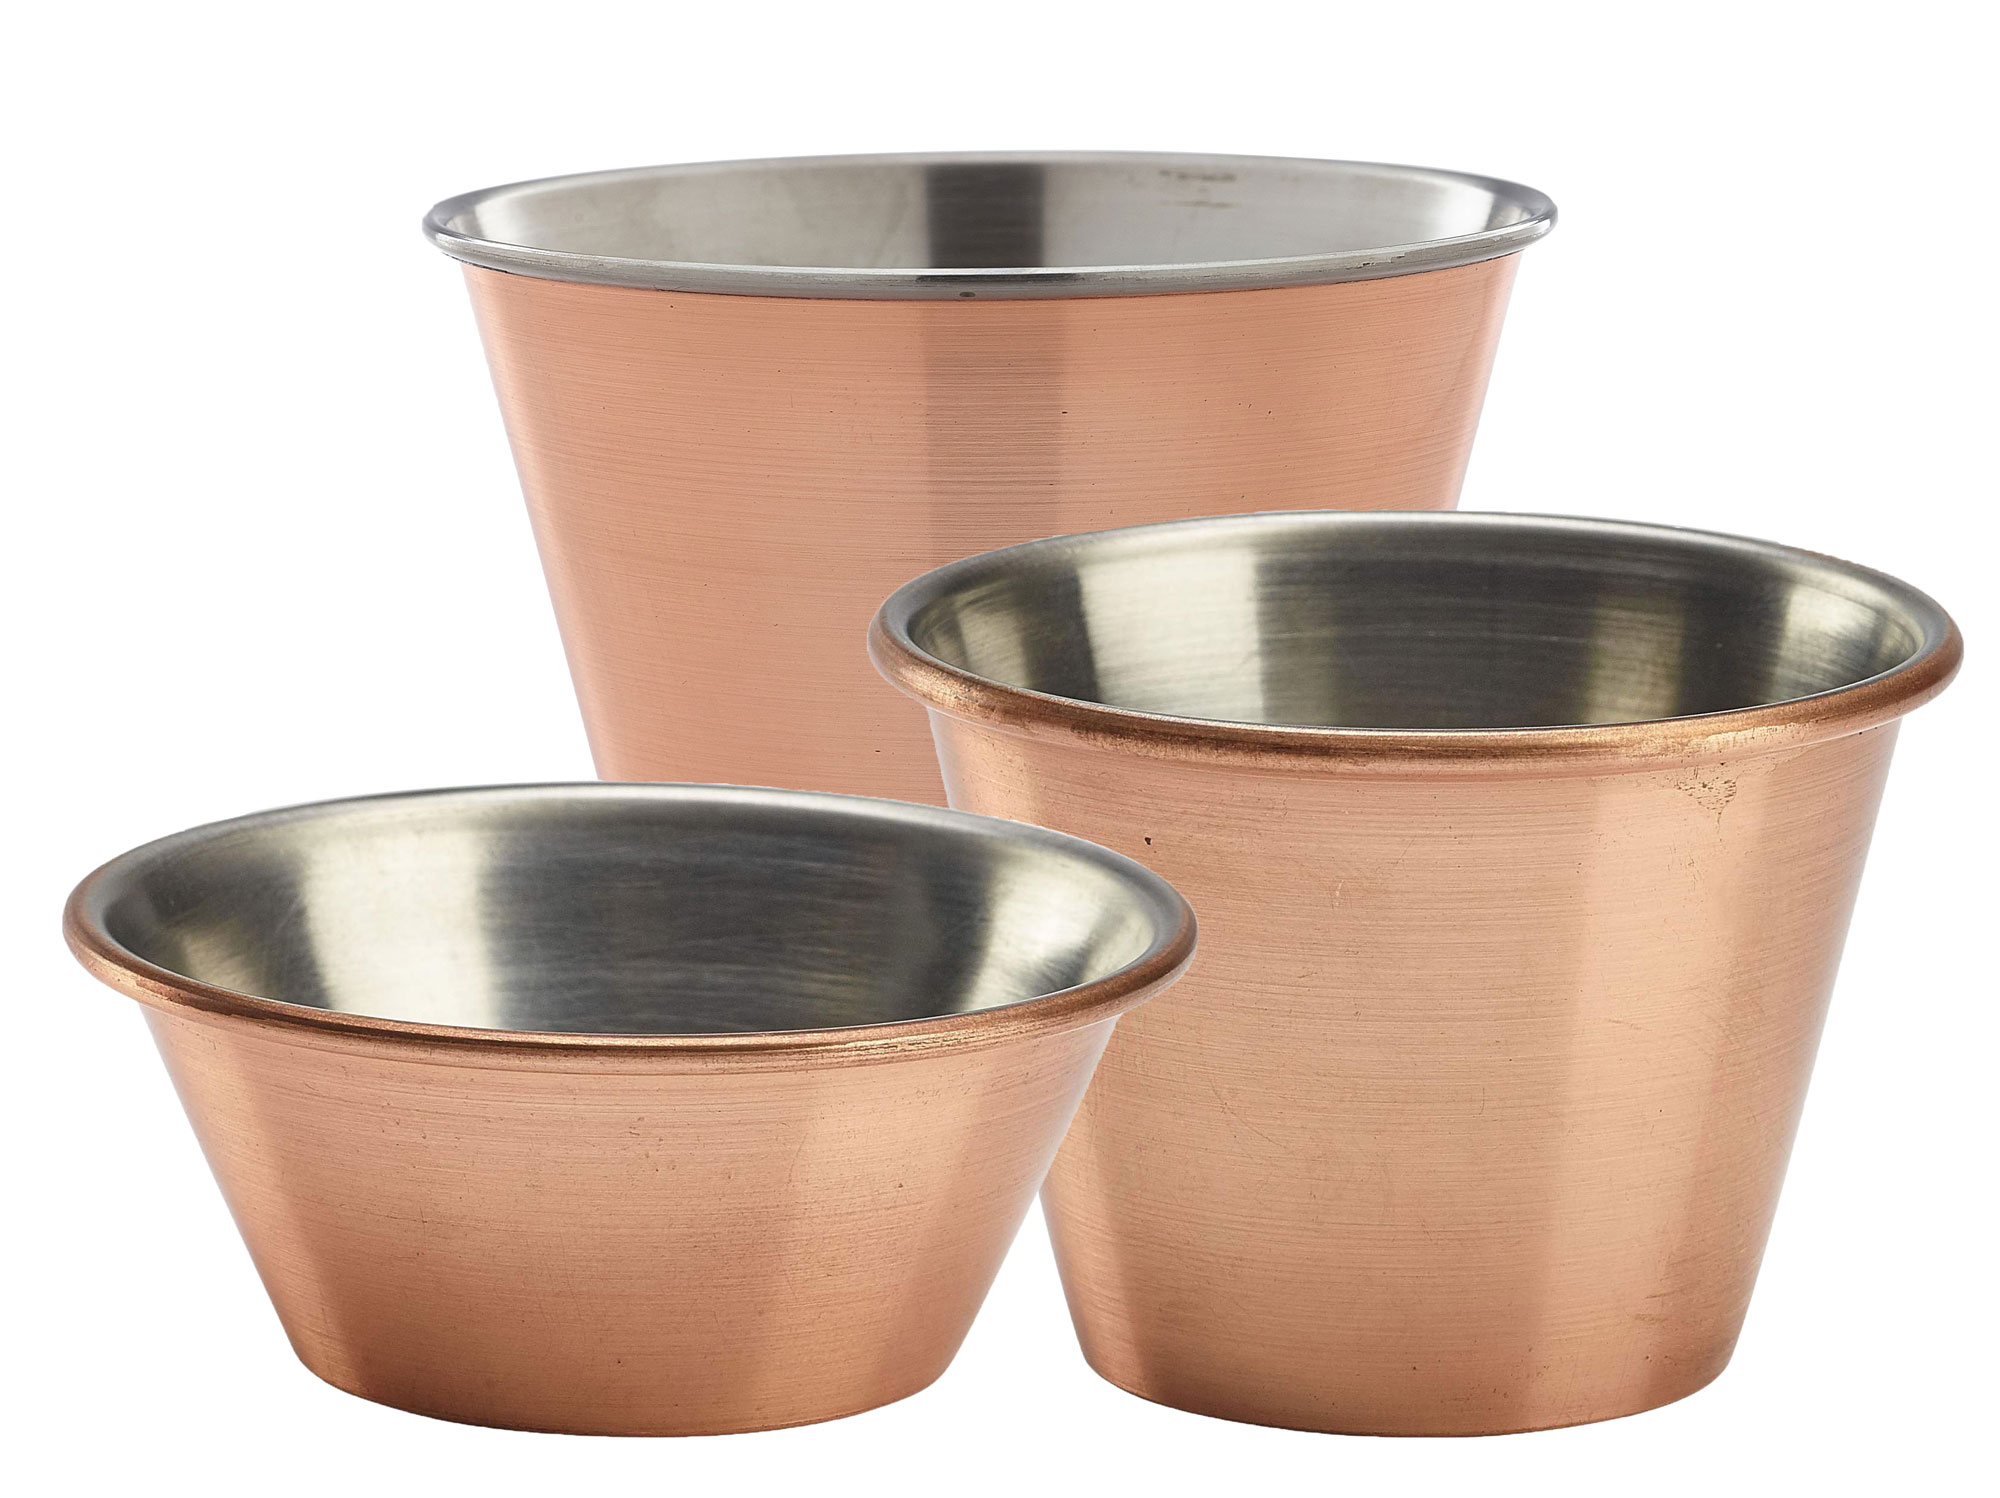 Ramekin with rolled edge, stainless steel copper-colored - various colors